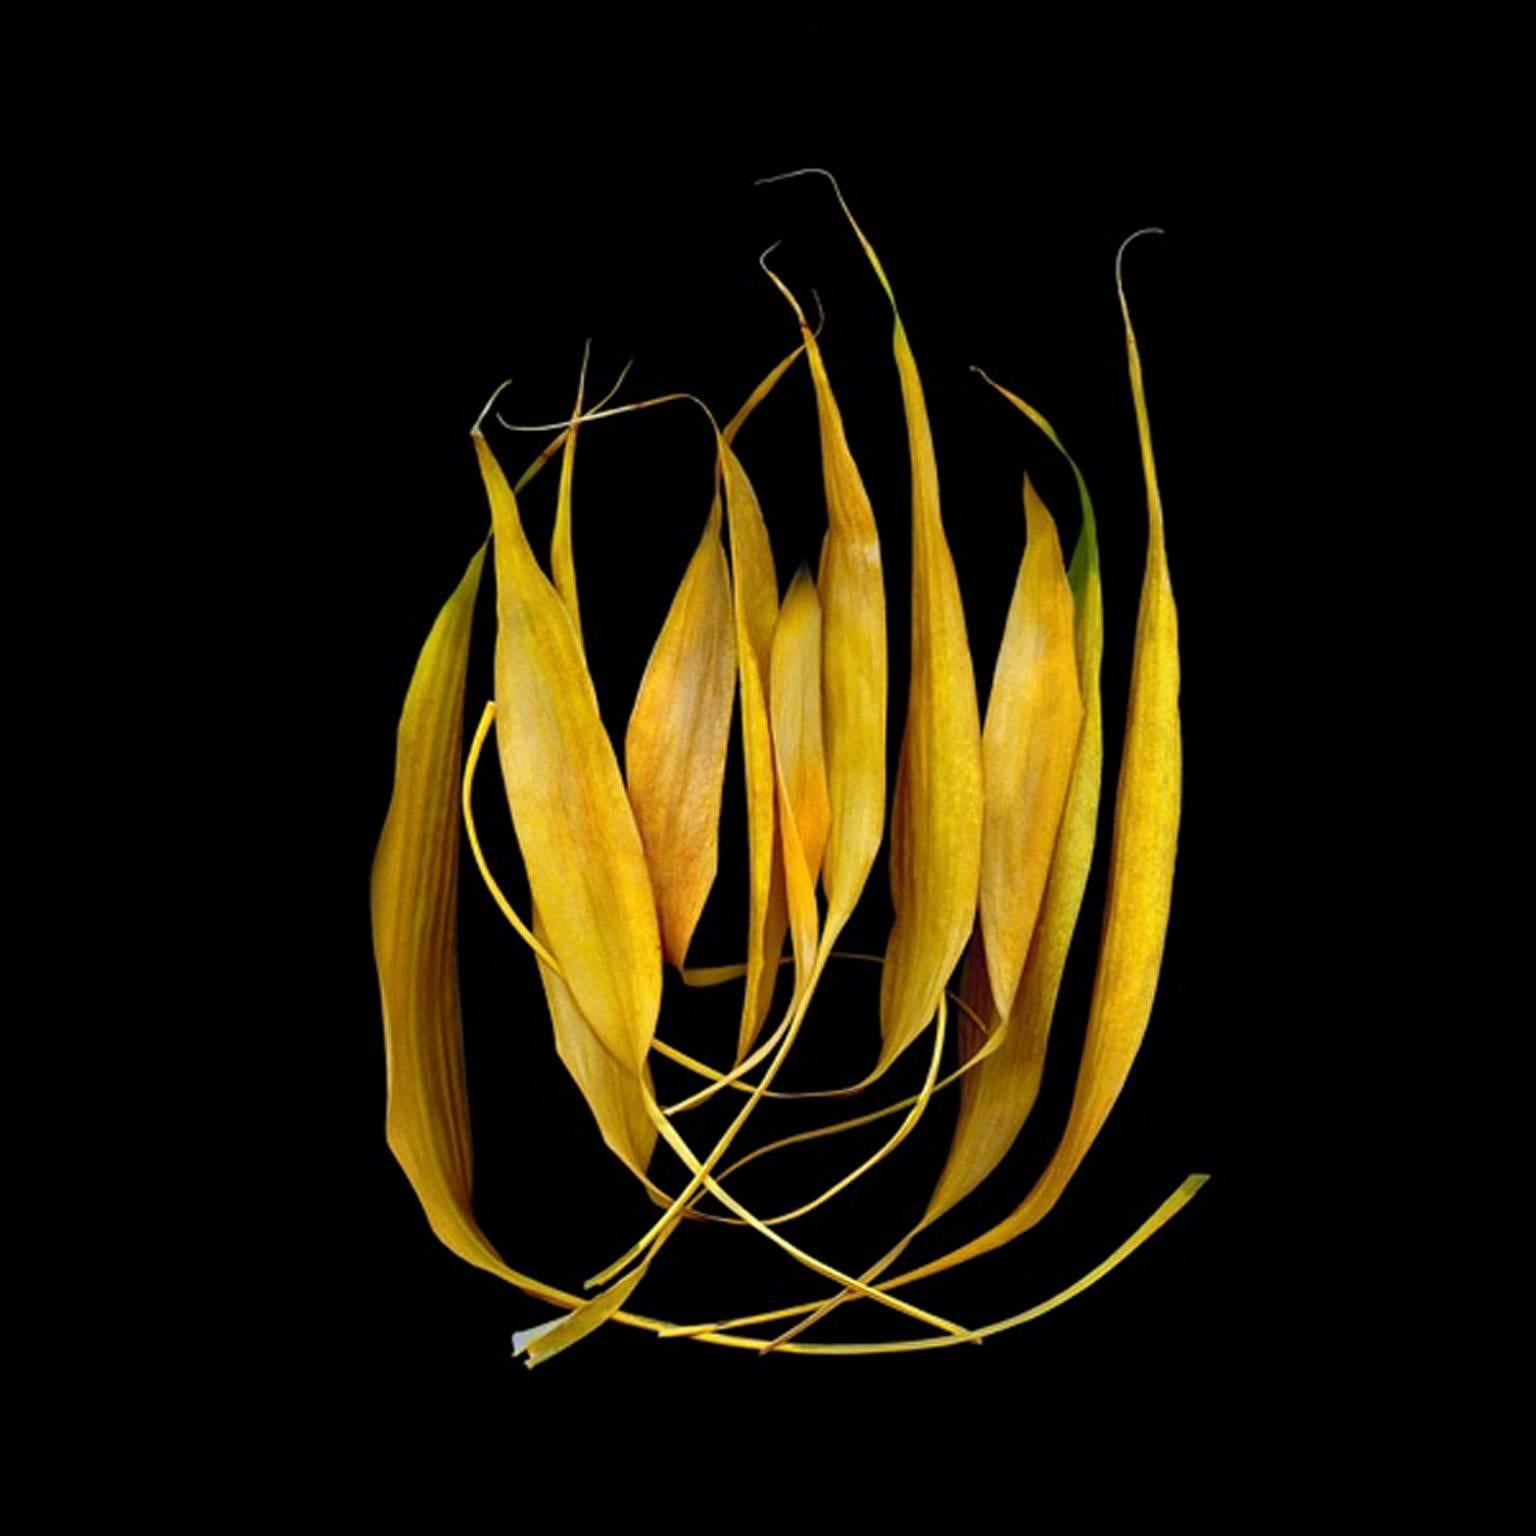 Jerry Freedner Color Photograph - Bamboo 28 (Modern Still Life Photo of Bright Yellow Bamboo on Black Background)